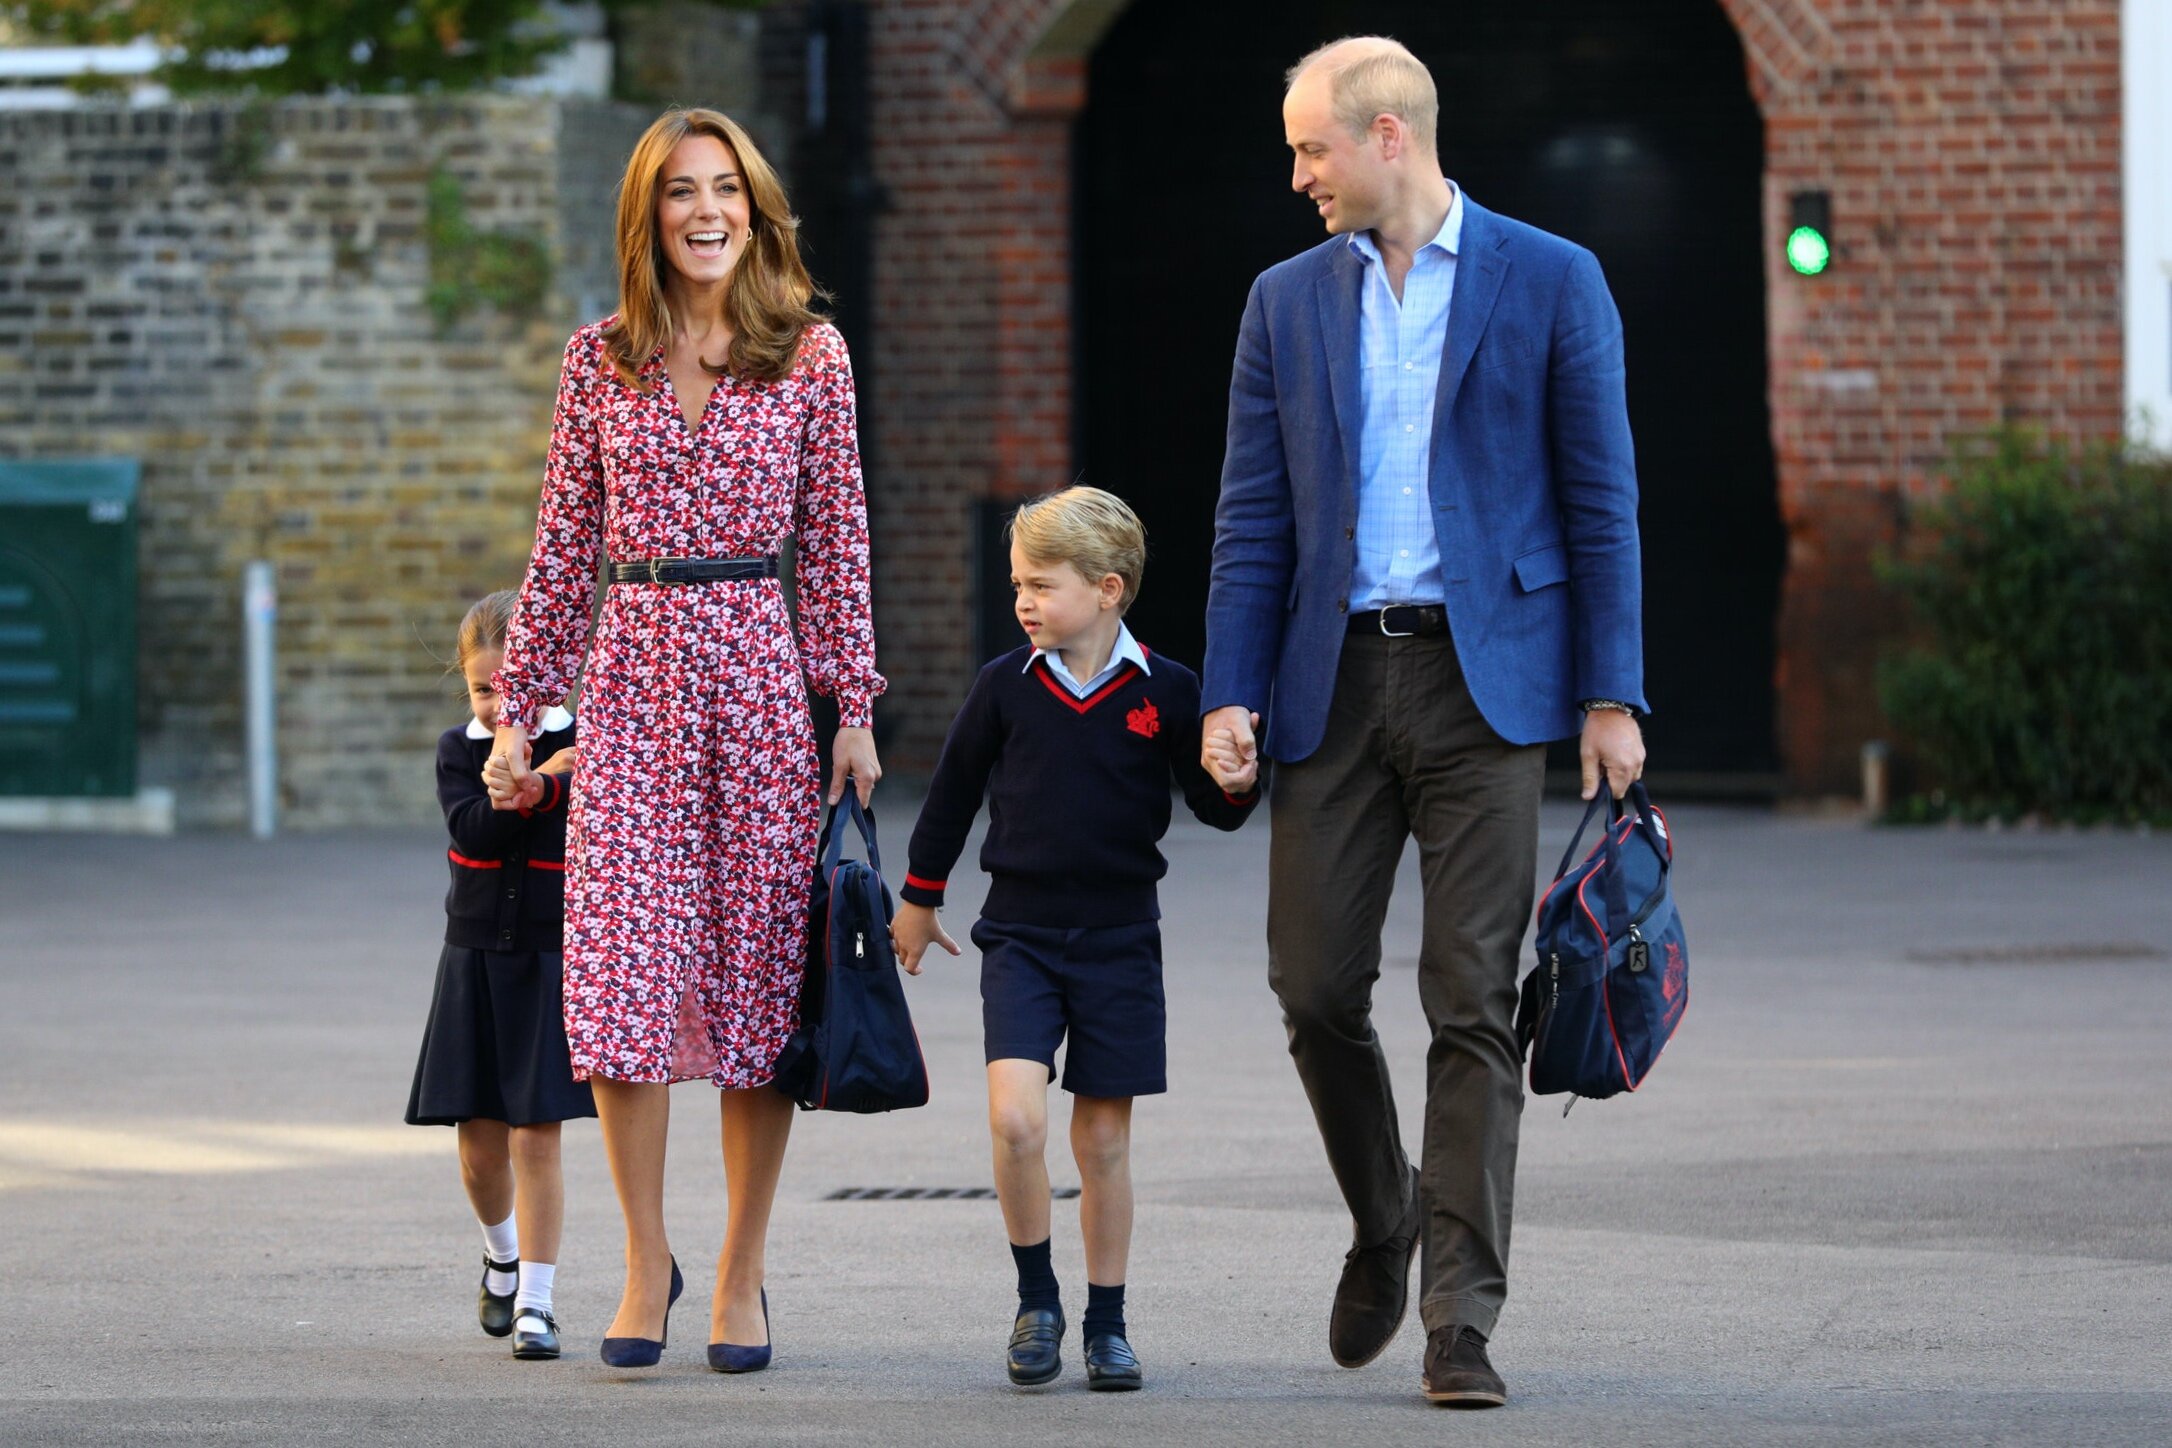  Princess Charlotte as she arrives for her first day of school at Thomas's Battersea in London, accompanied by her brother Prince George and her parents the Duke and Duchess of Cambridge. PA Photo. Picture date: Thursday September 5, 2019. Photo cred